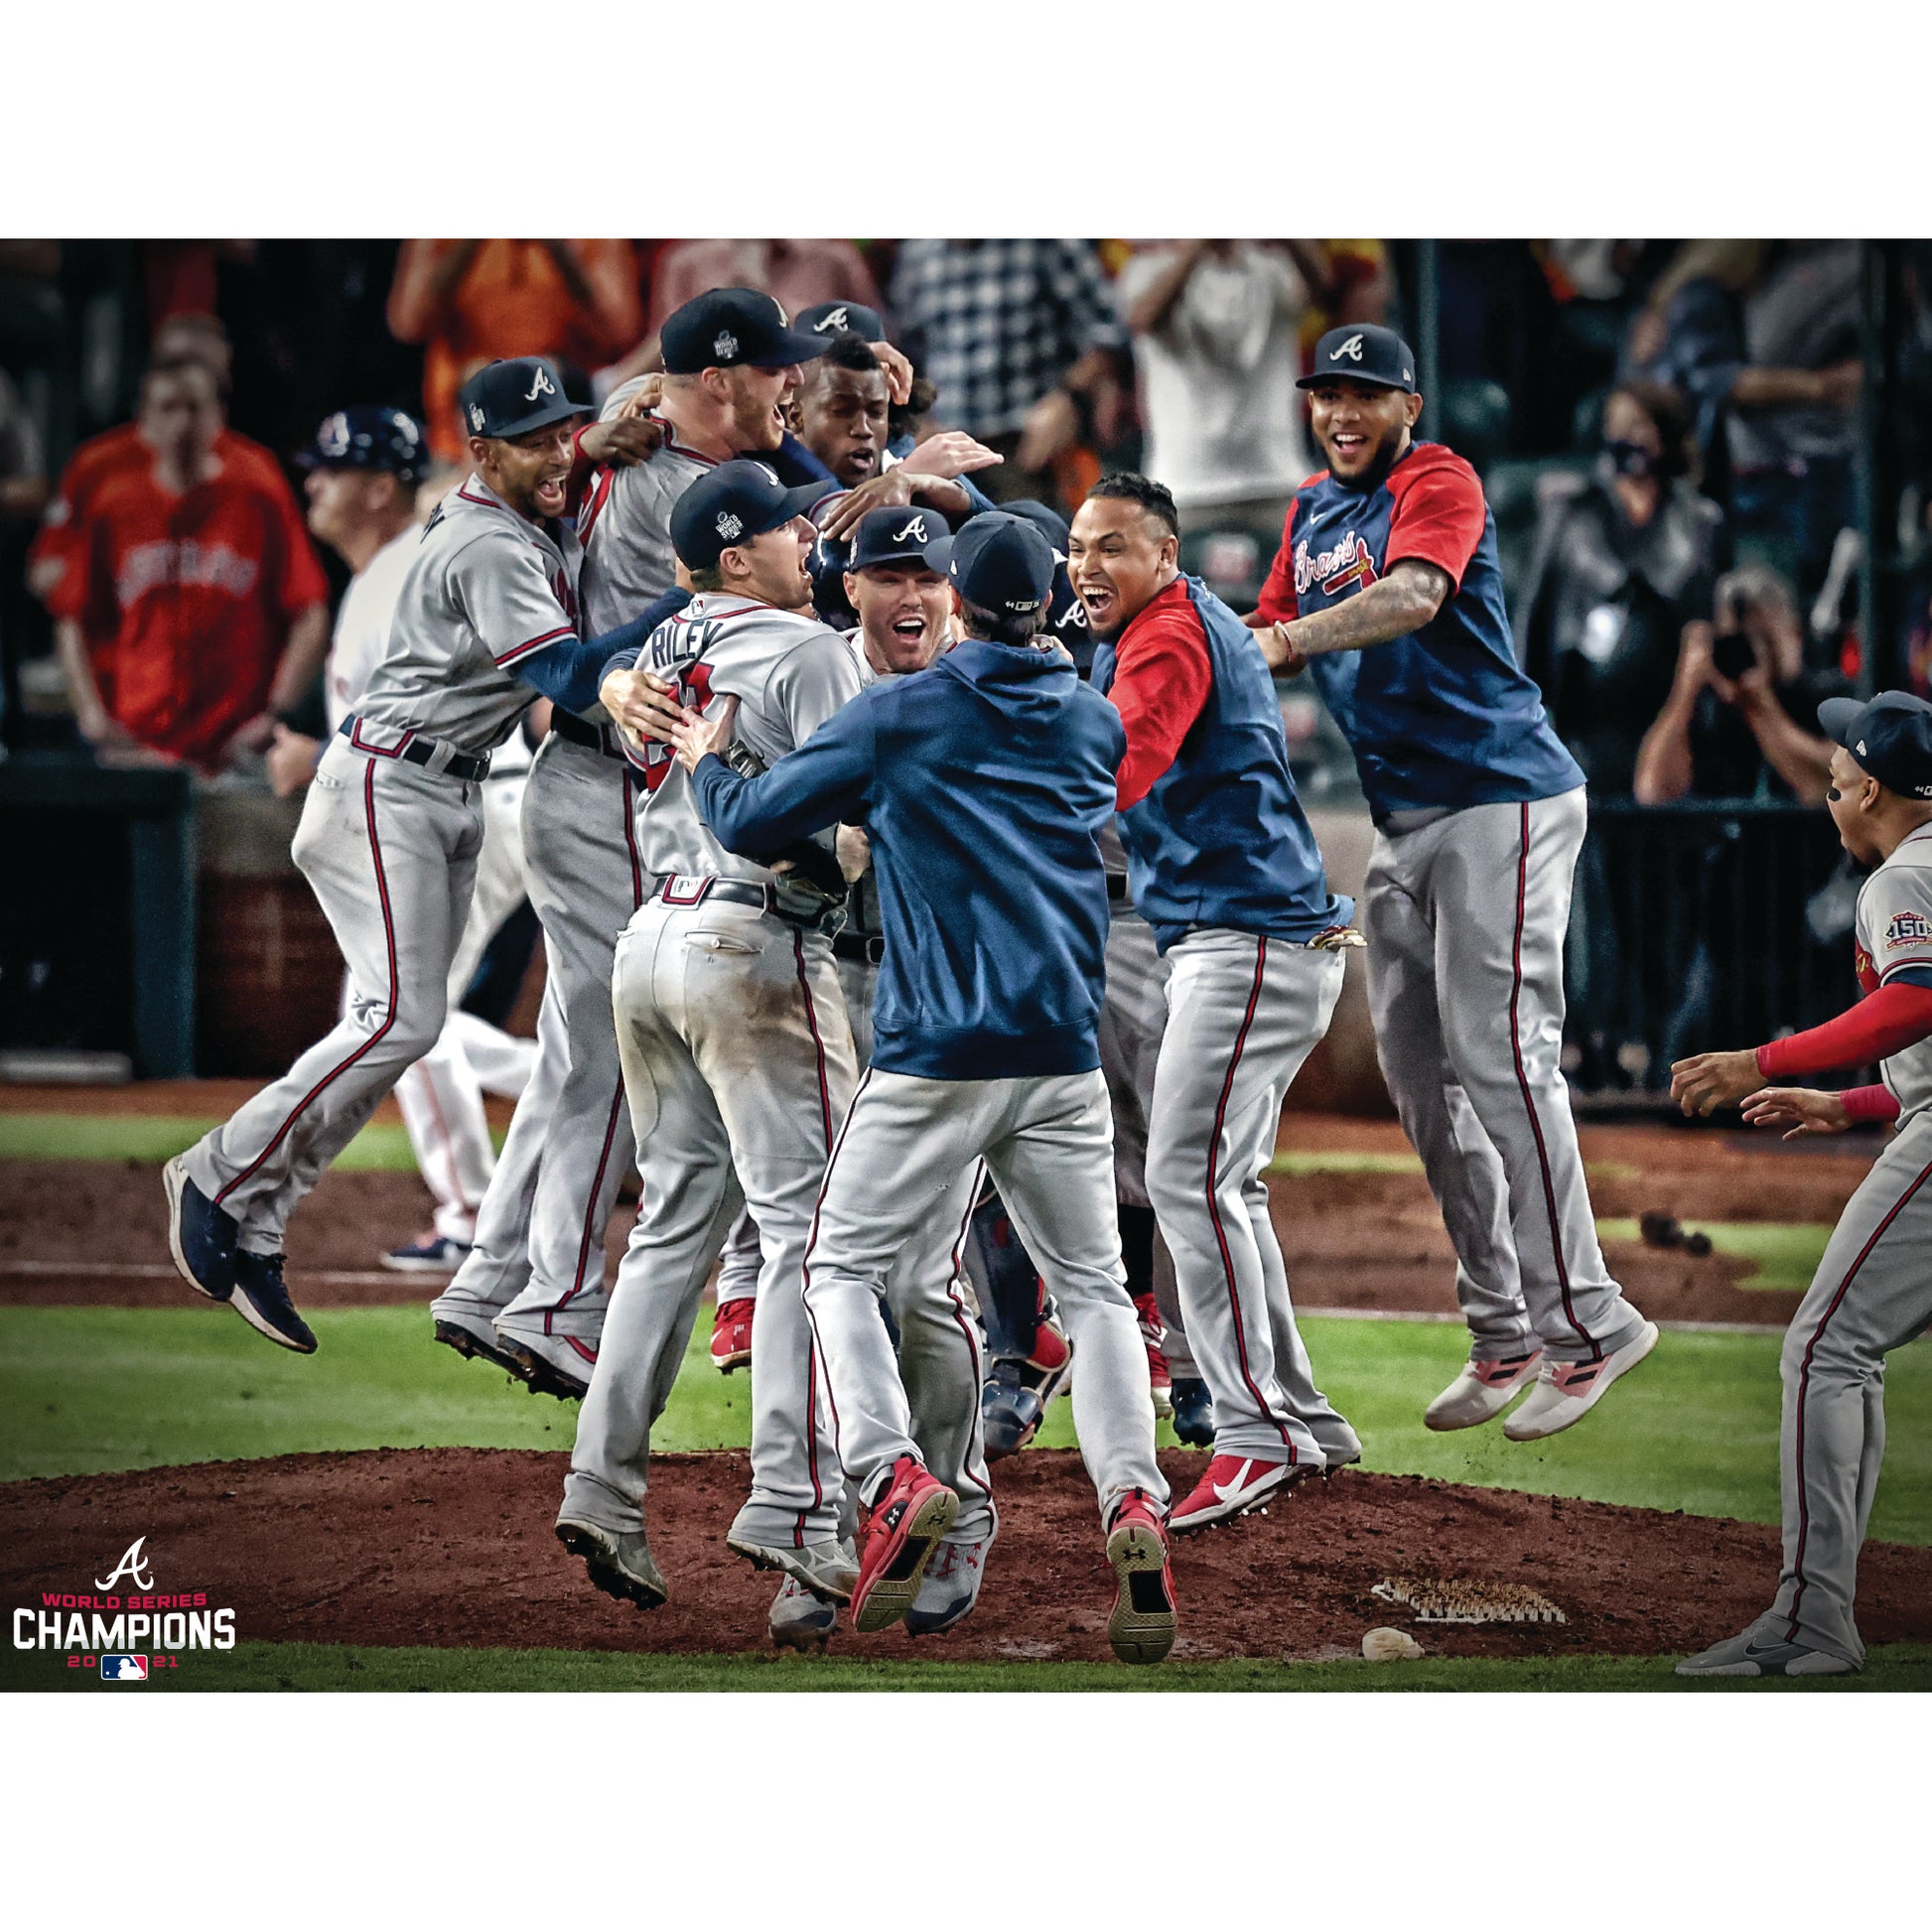 Atlanta Braves: Team 2021 World Series Celebration Poster - MLB Removable Adhesive Wall Decal Giant 48W x 36H